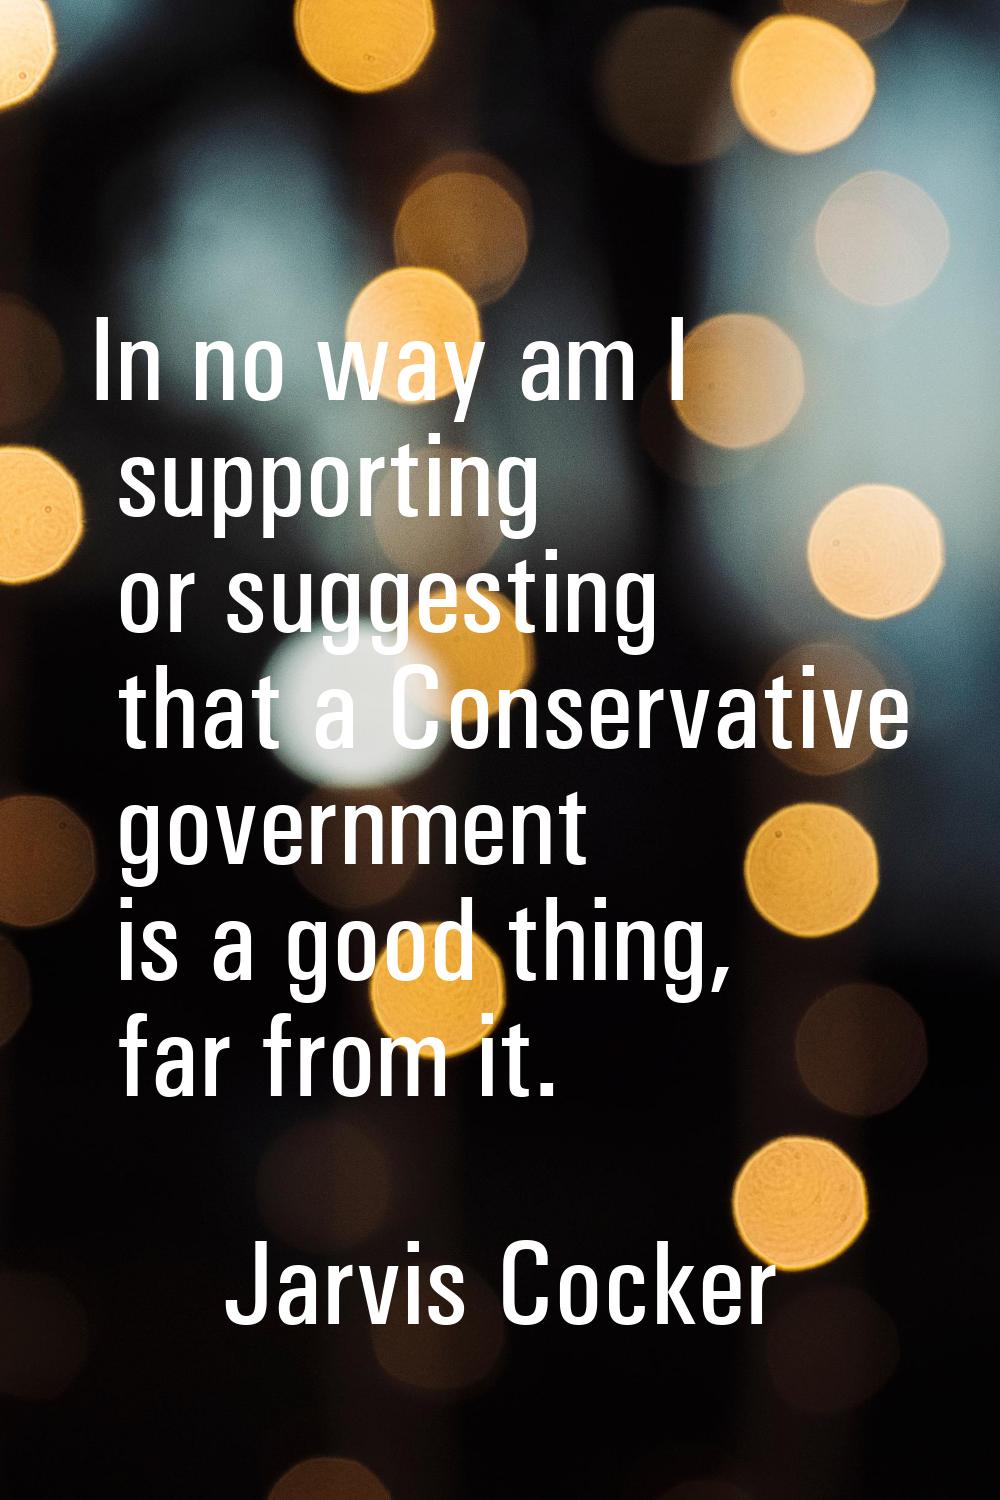 In no way am I supporting or suggesting that a Conservative government is a good thing, far from it